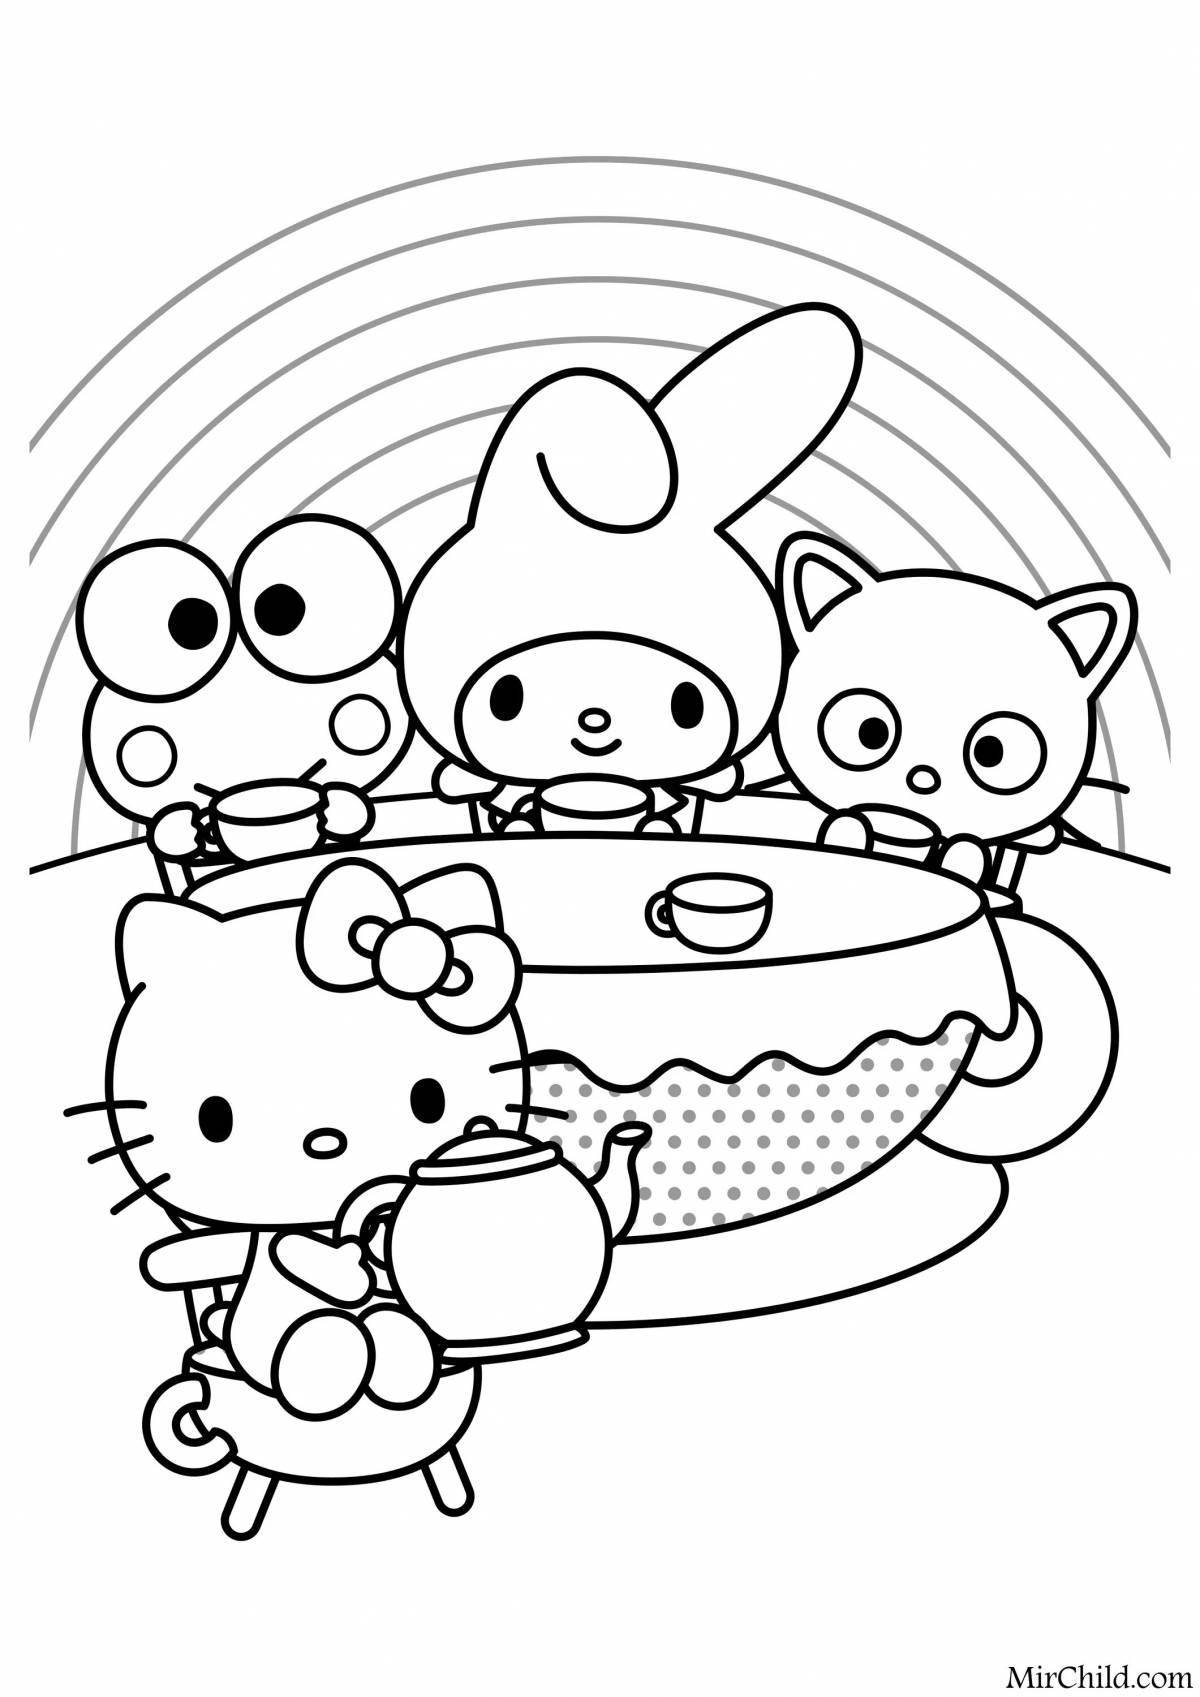 Exquisite melody kitty coloring book